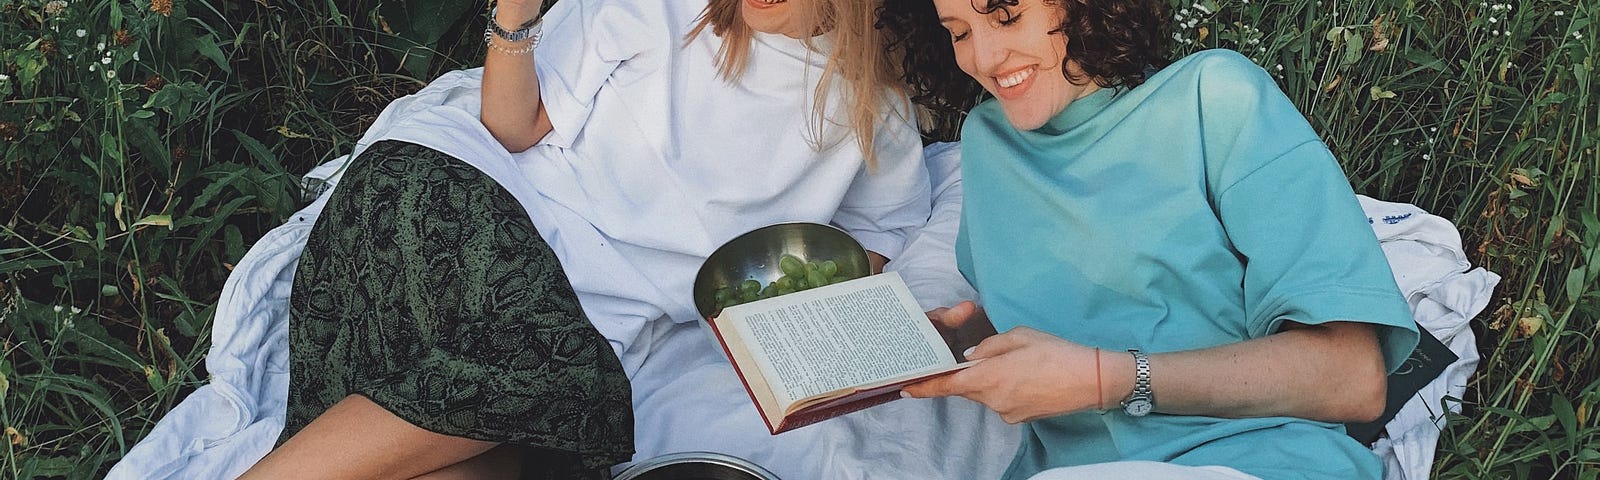 Two women sat on grass reading a book and eating olives